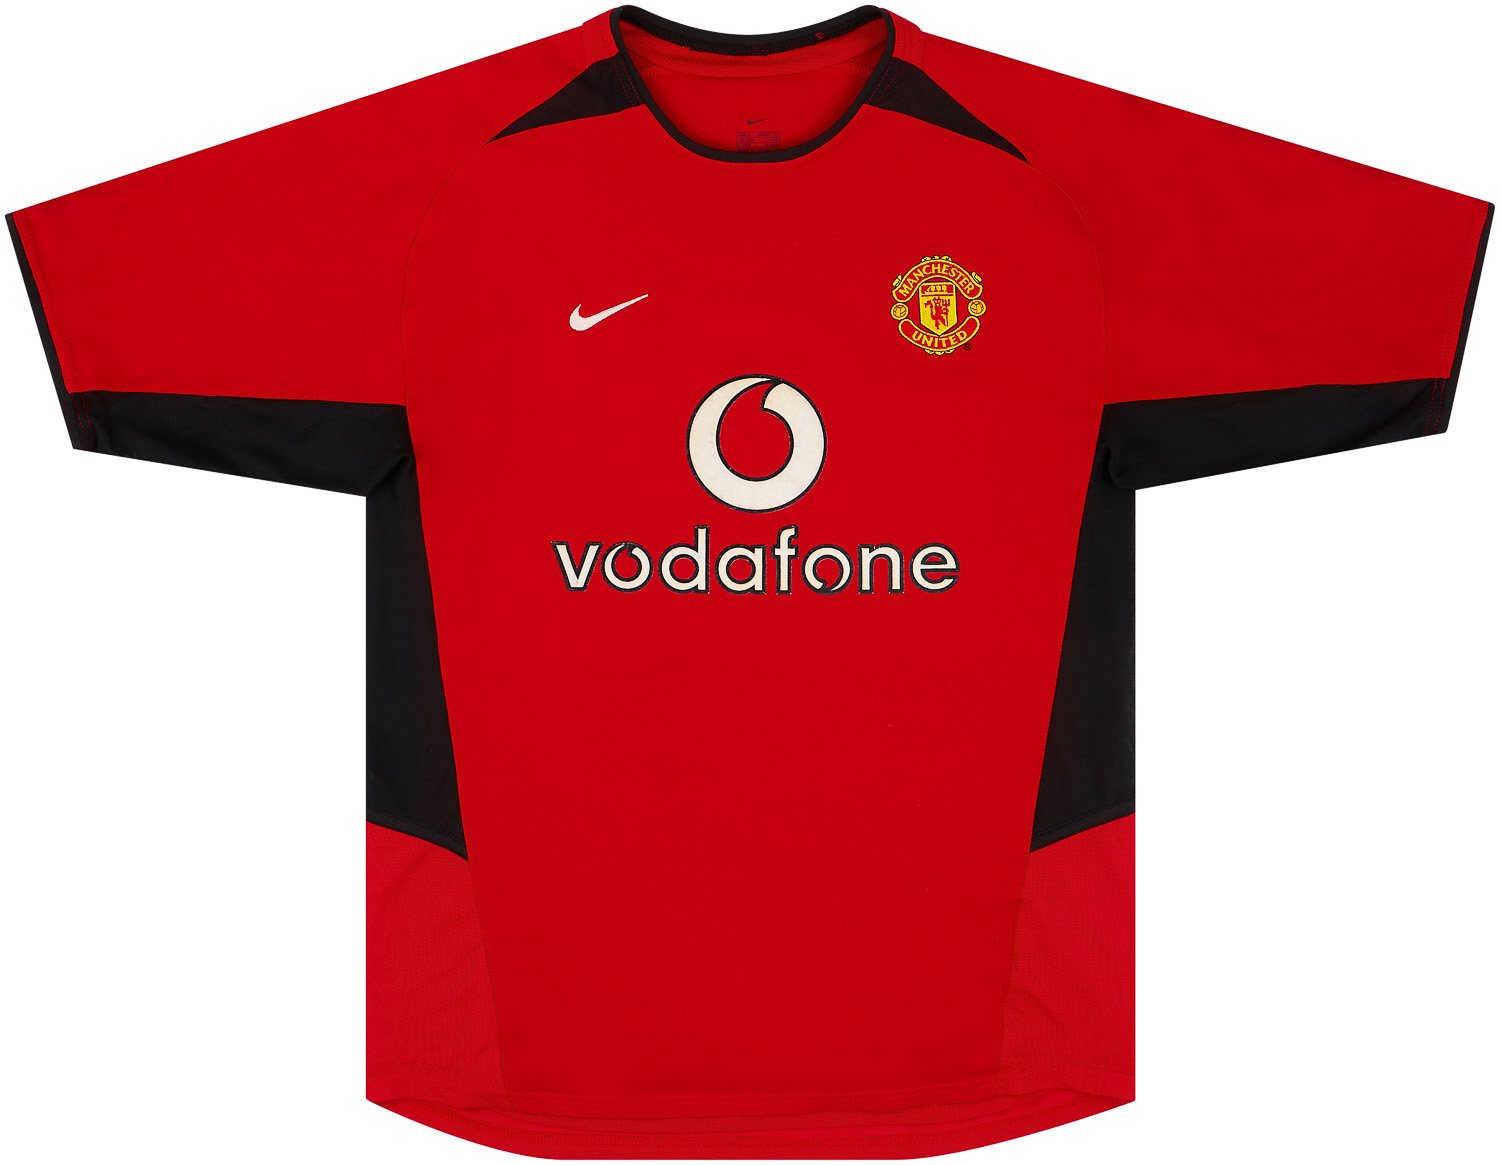 2002-04 Manchester United Home Shirt - 9/10 -